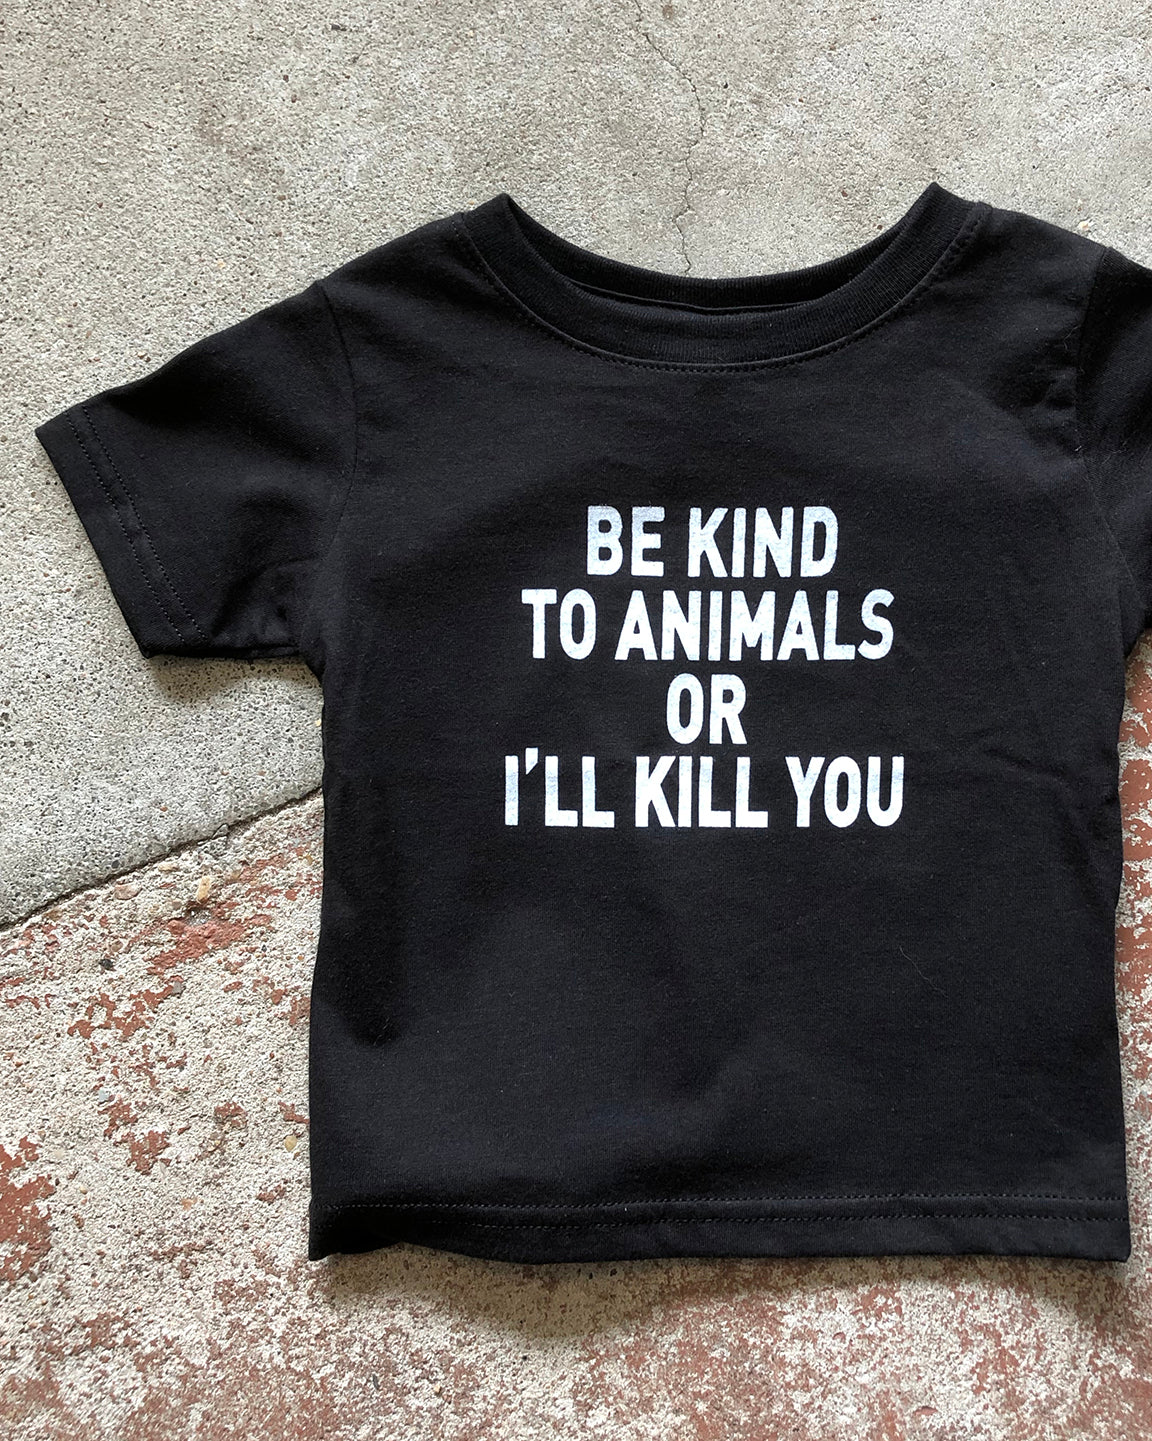 Be Kind to Animals or I'll Kill You - Kids' Tee